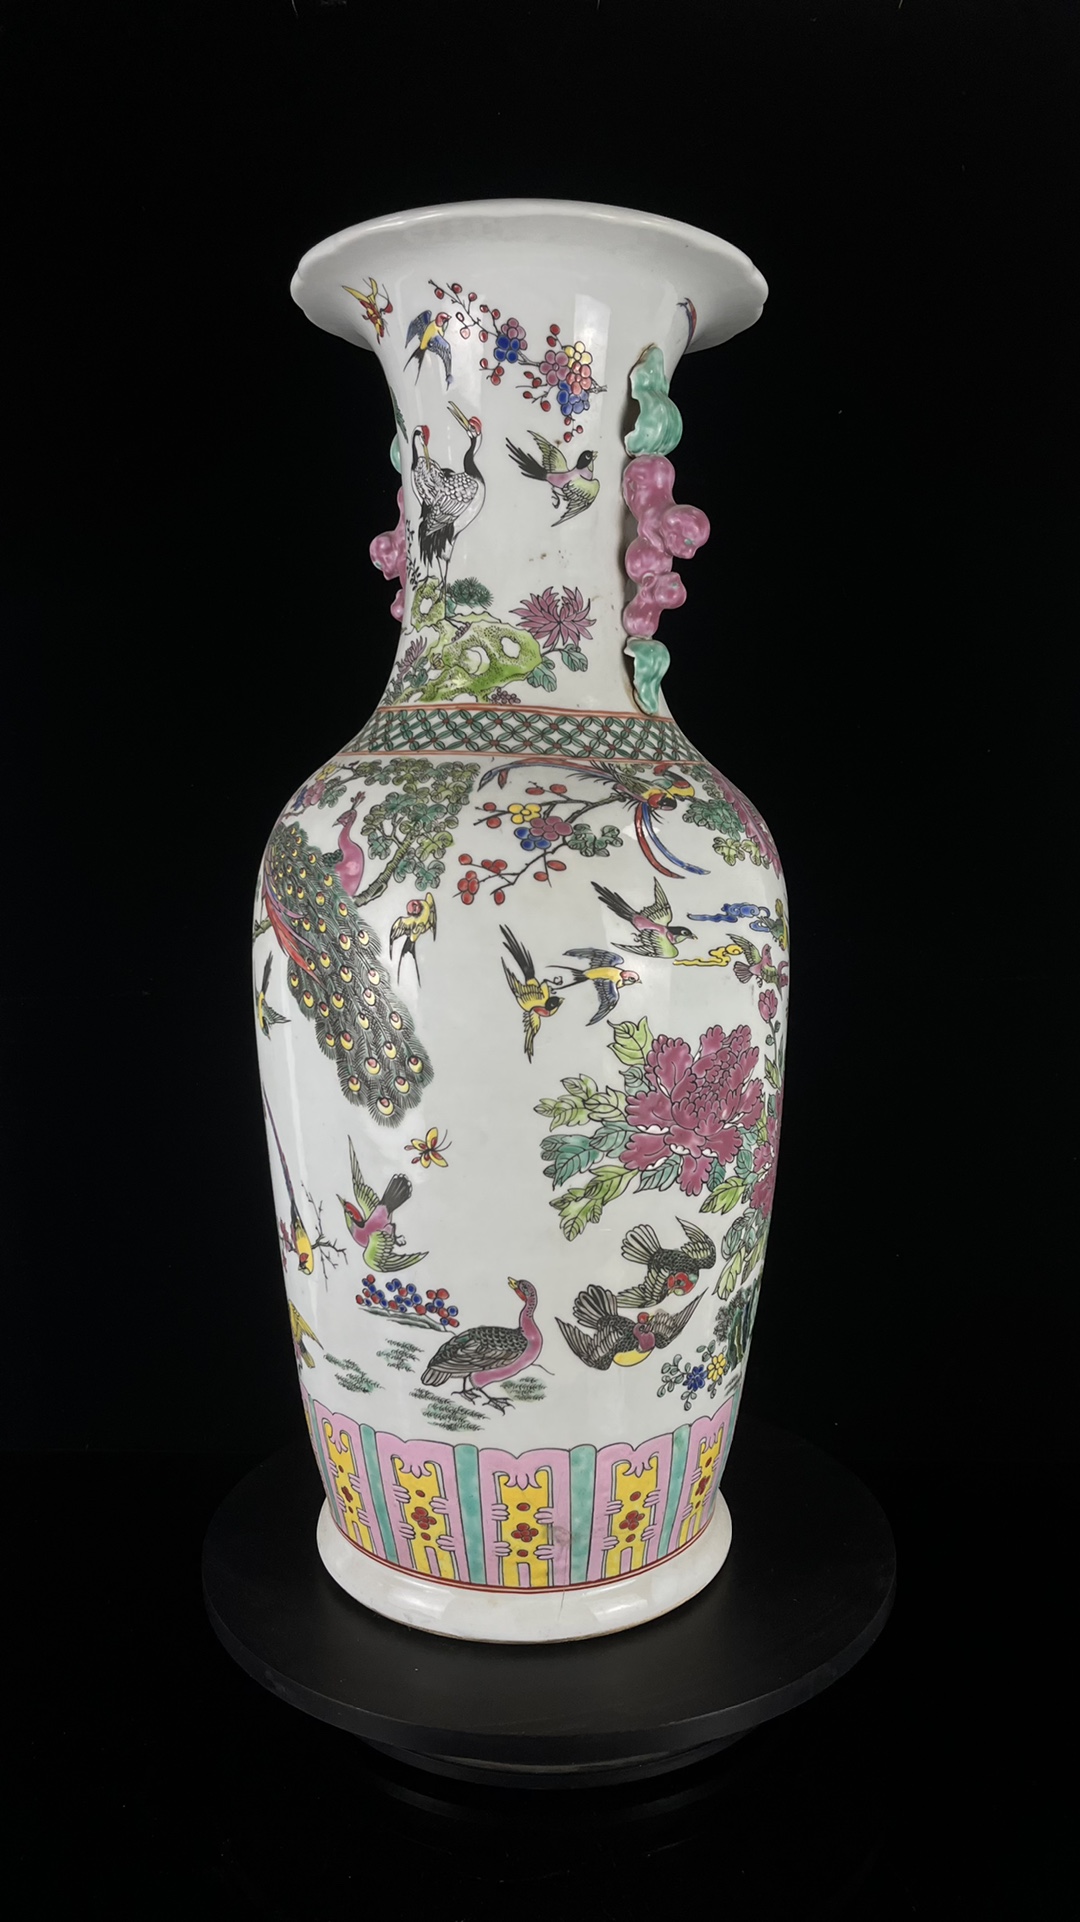 Large flower and bird vase made in the Kangxi period of the Qing Dynasty - Image 5 of 9